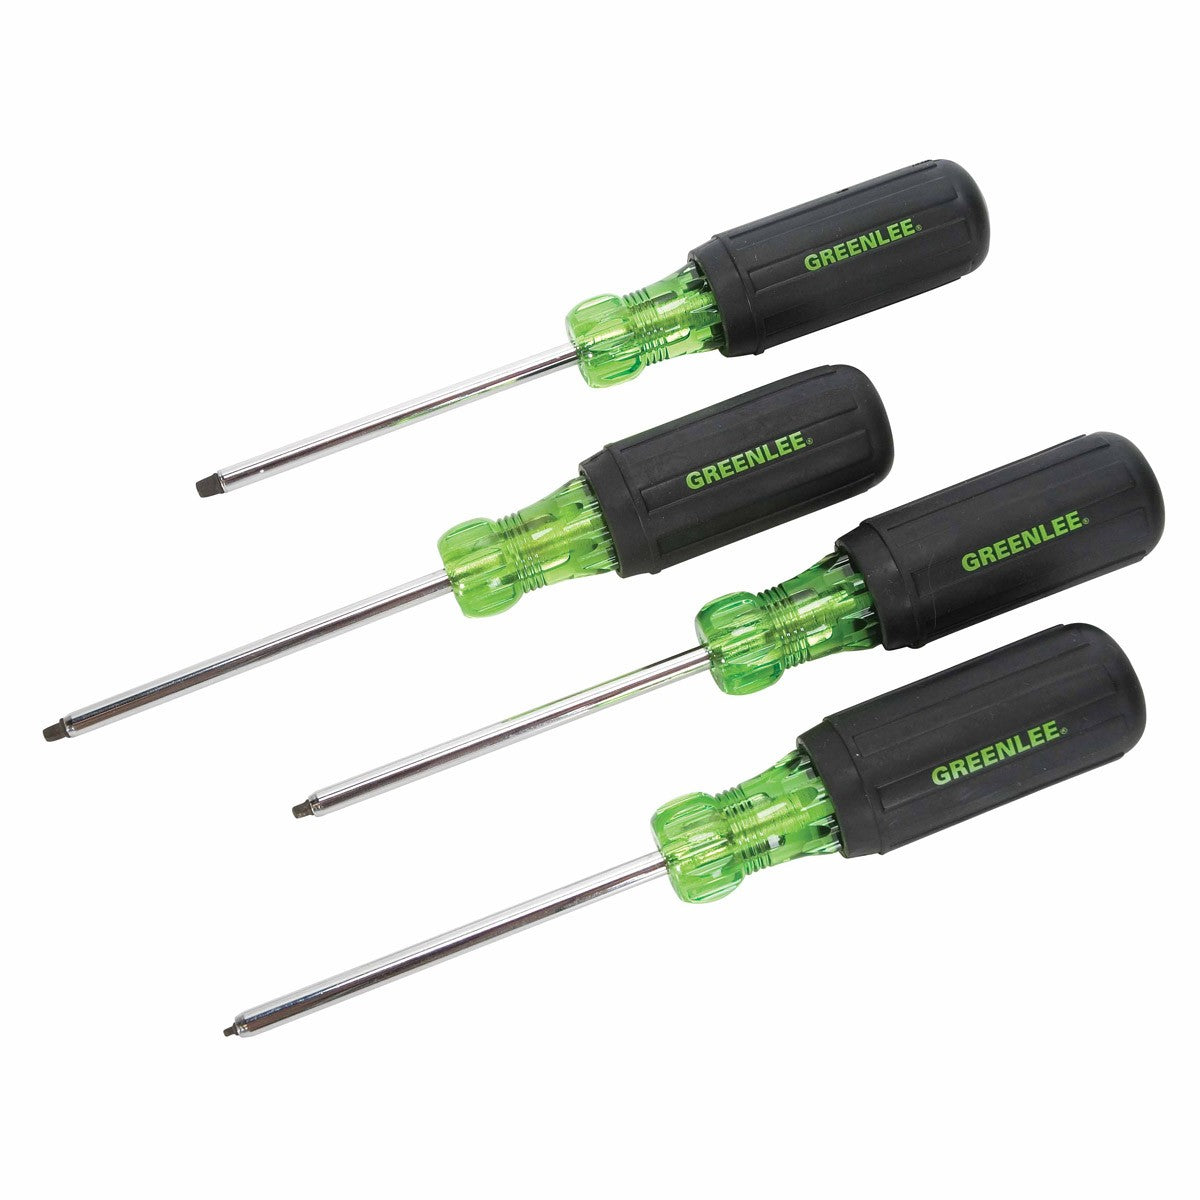 Greenlee 0353-01C 4-Piece Square-Recess Tip Driver Set